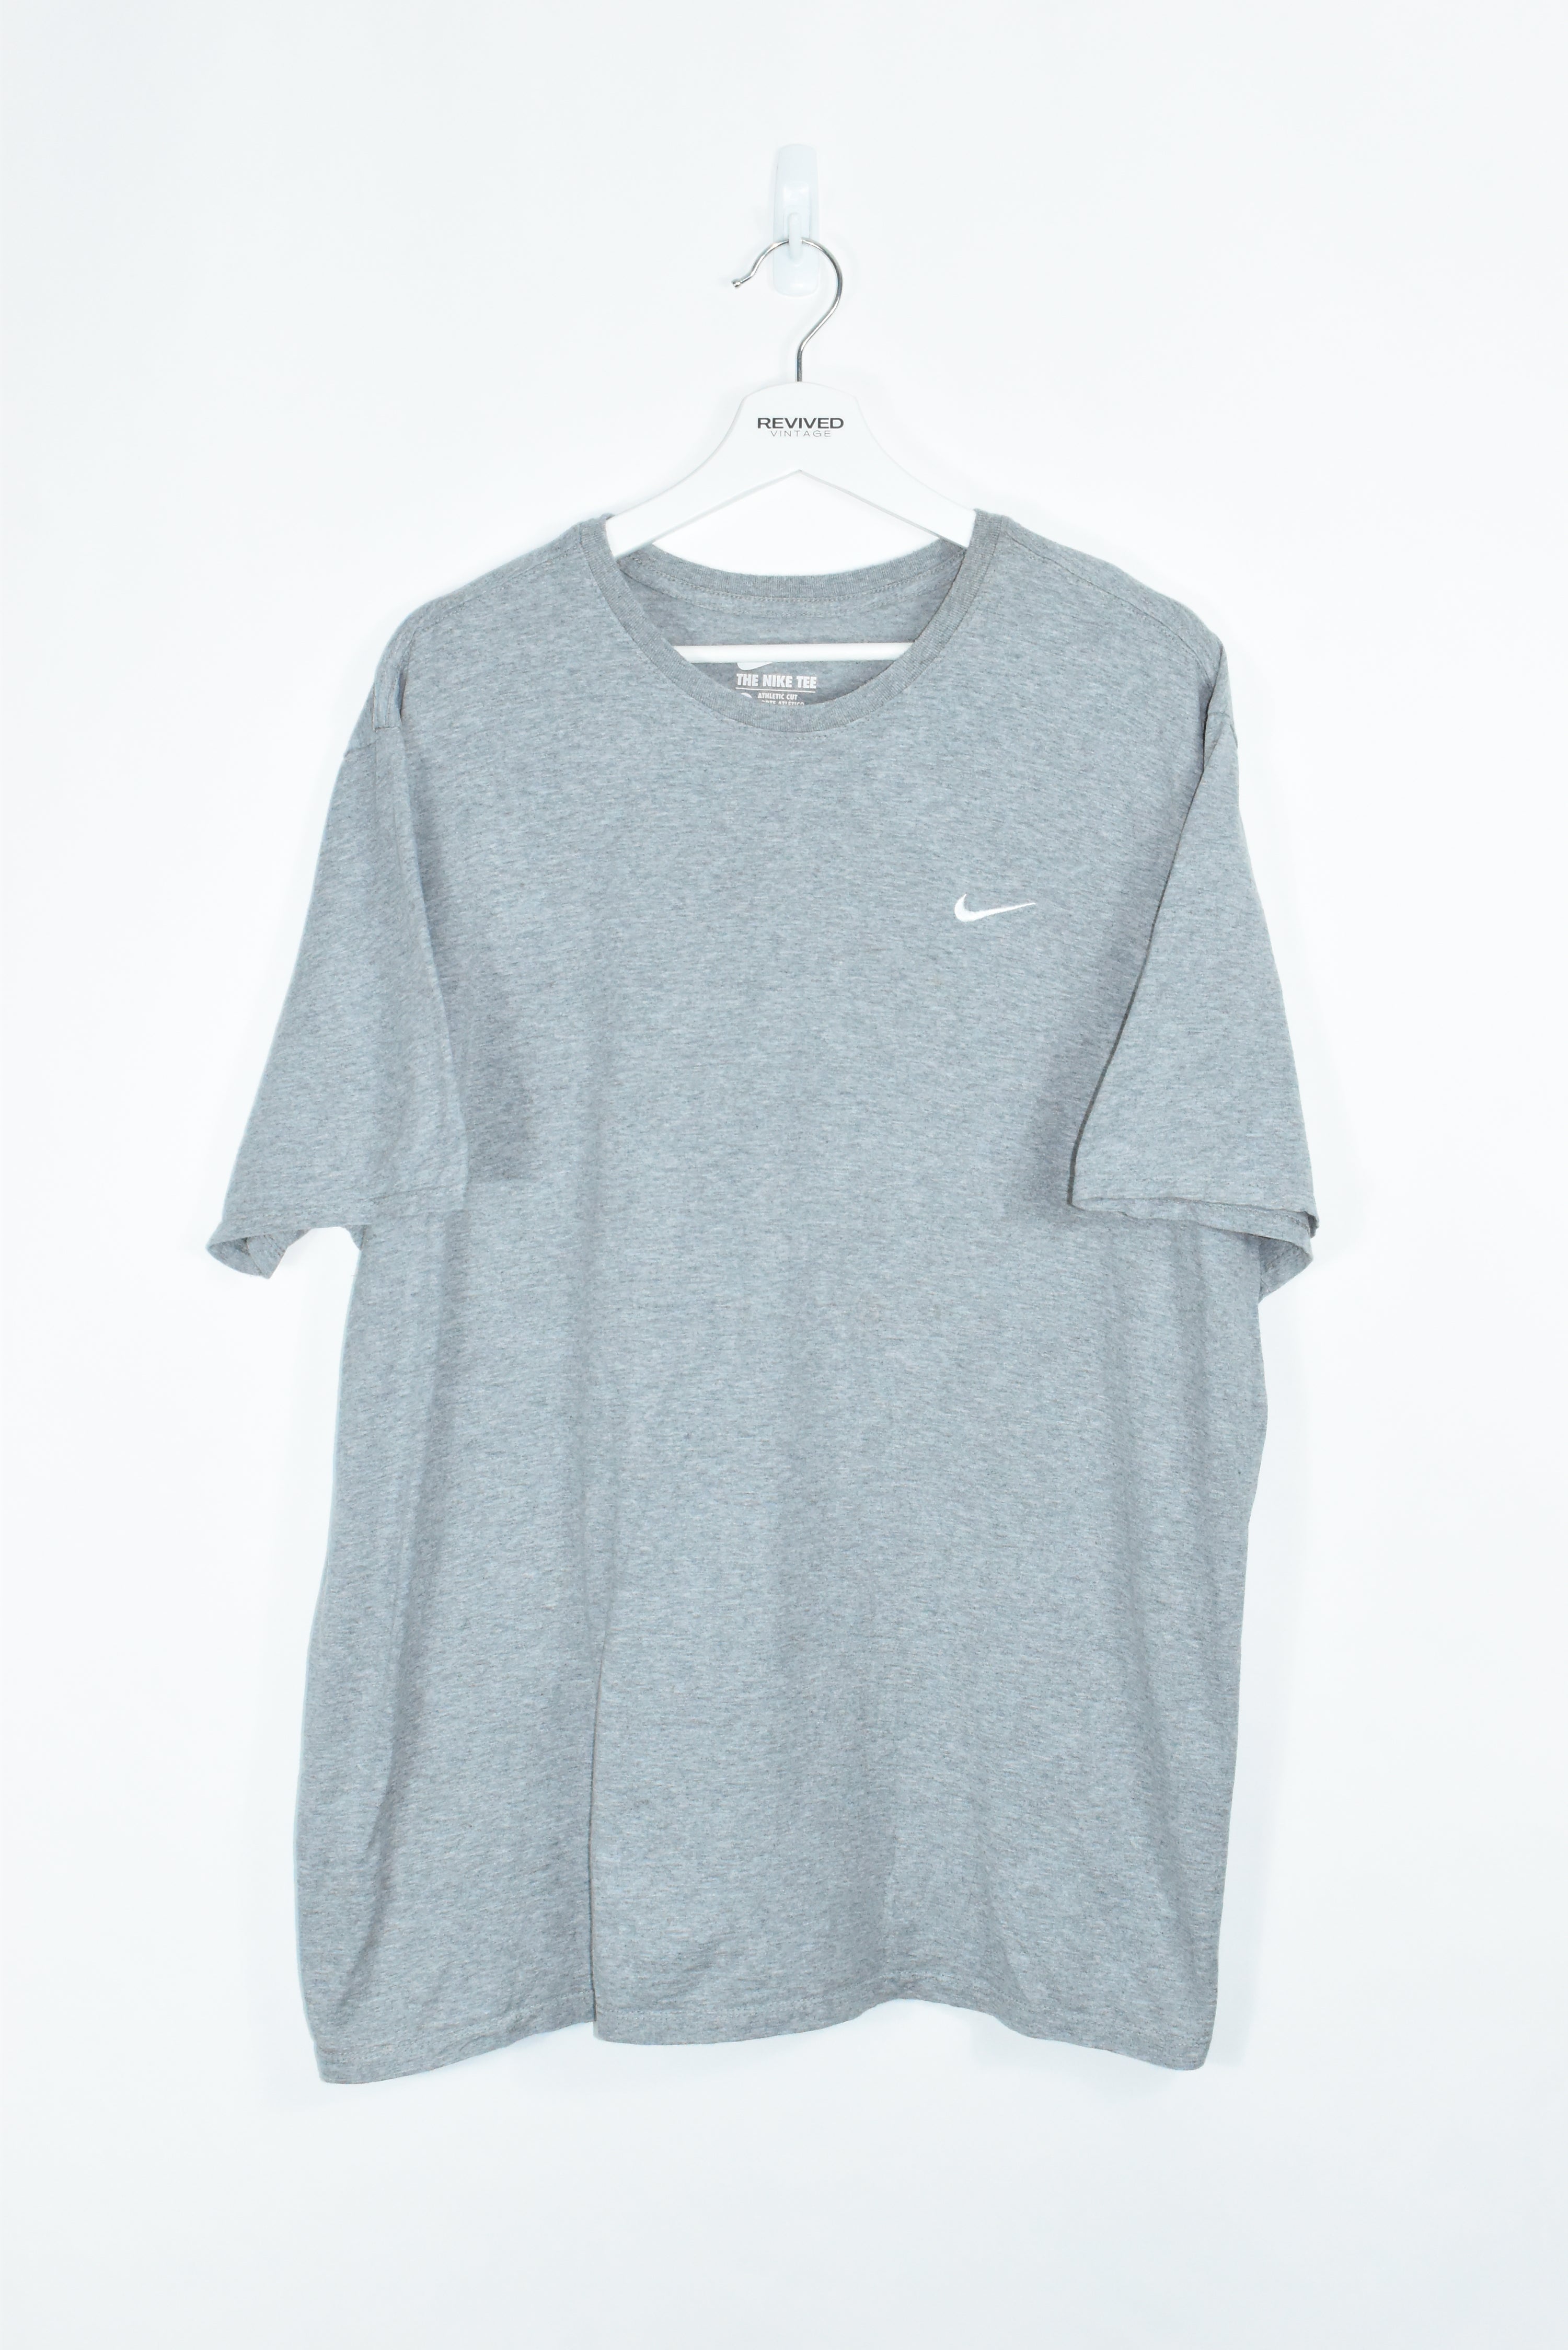 Vintage Nike Embroidery Small Swoosh T Shirt XXL